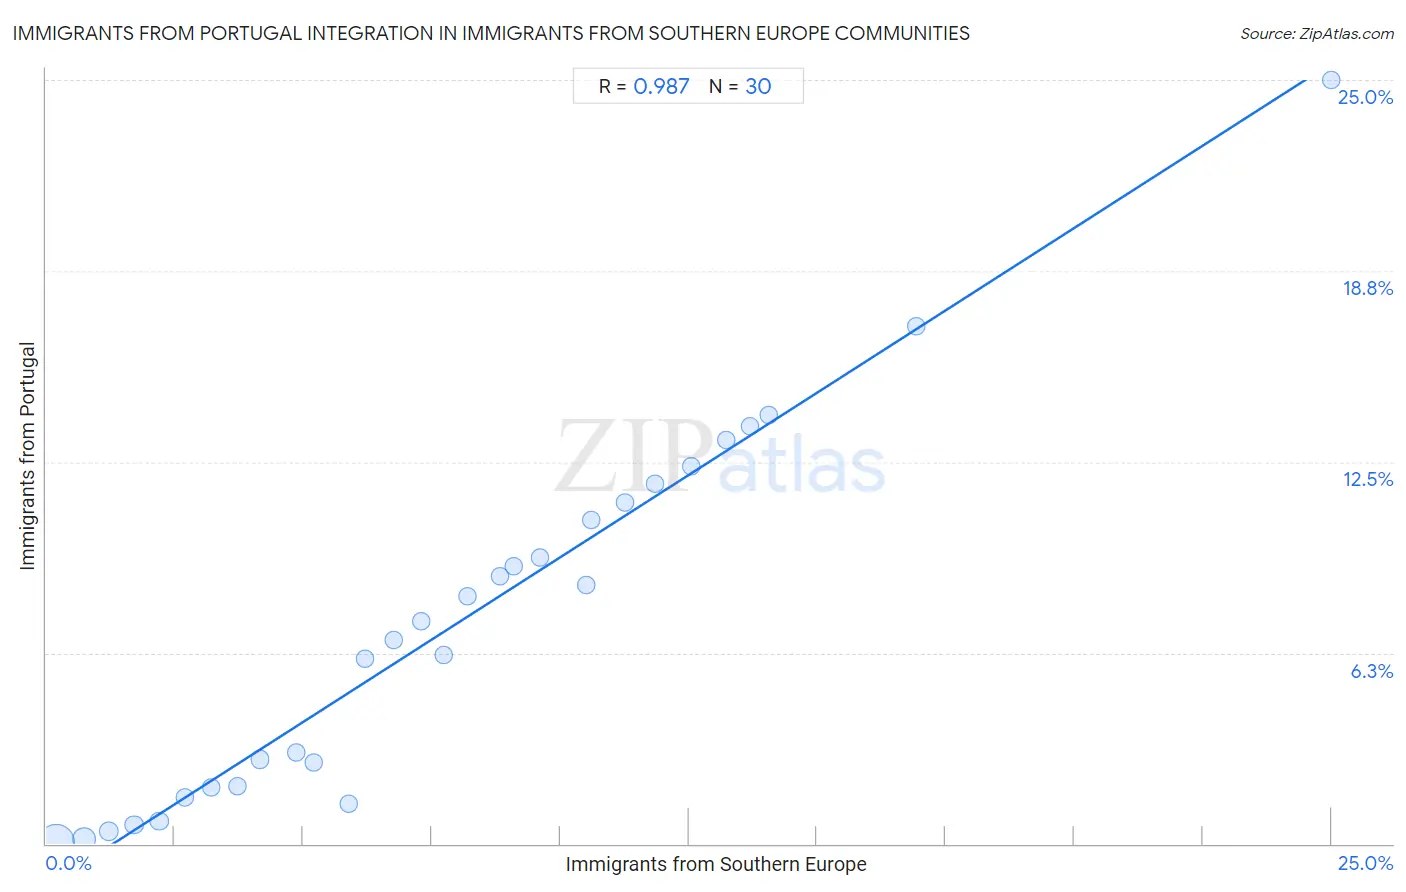 Immigrants from Southern Europe Integration in Immigrants from Portugal Communities